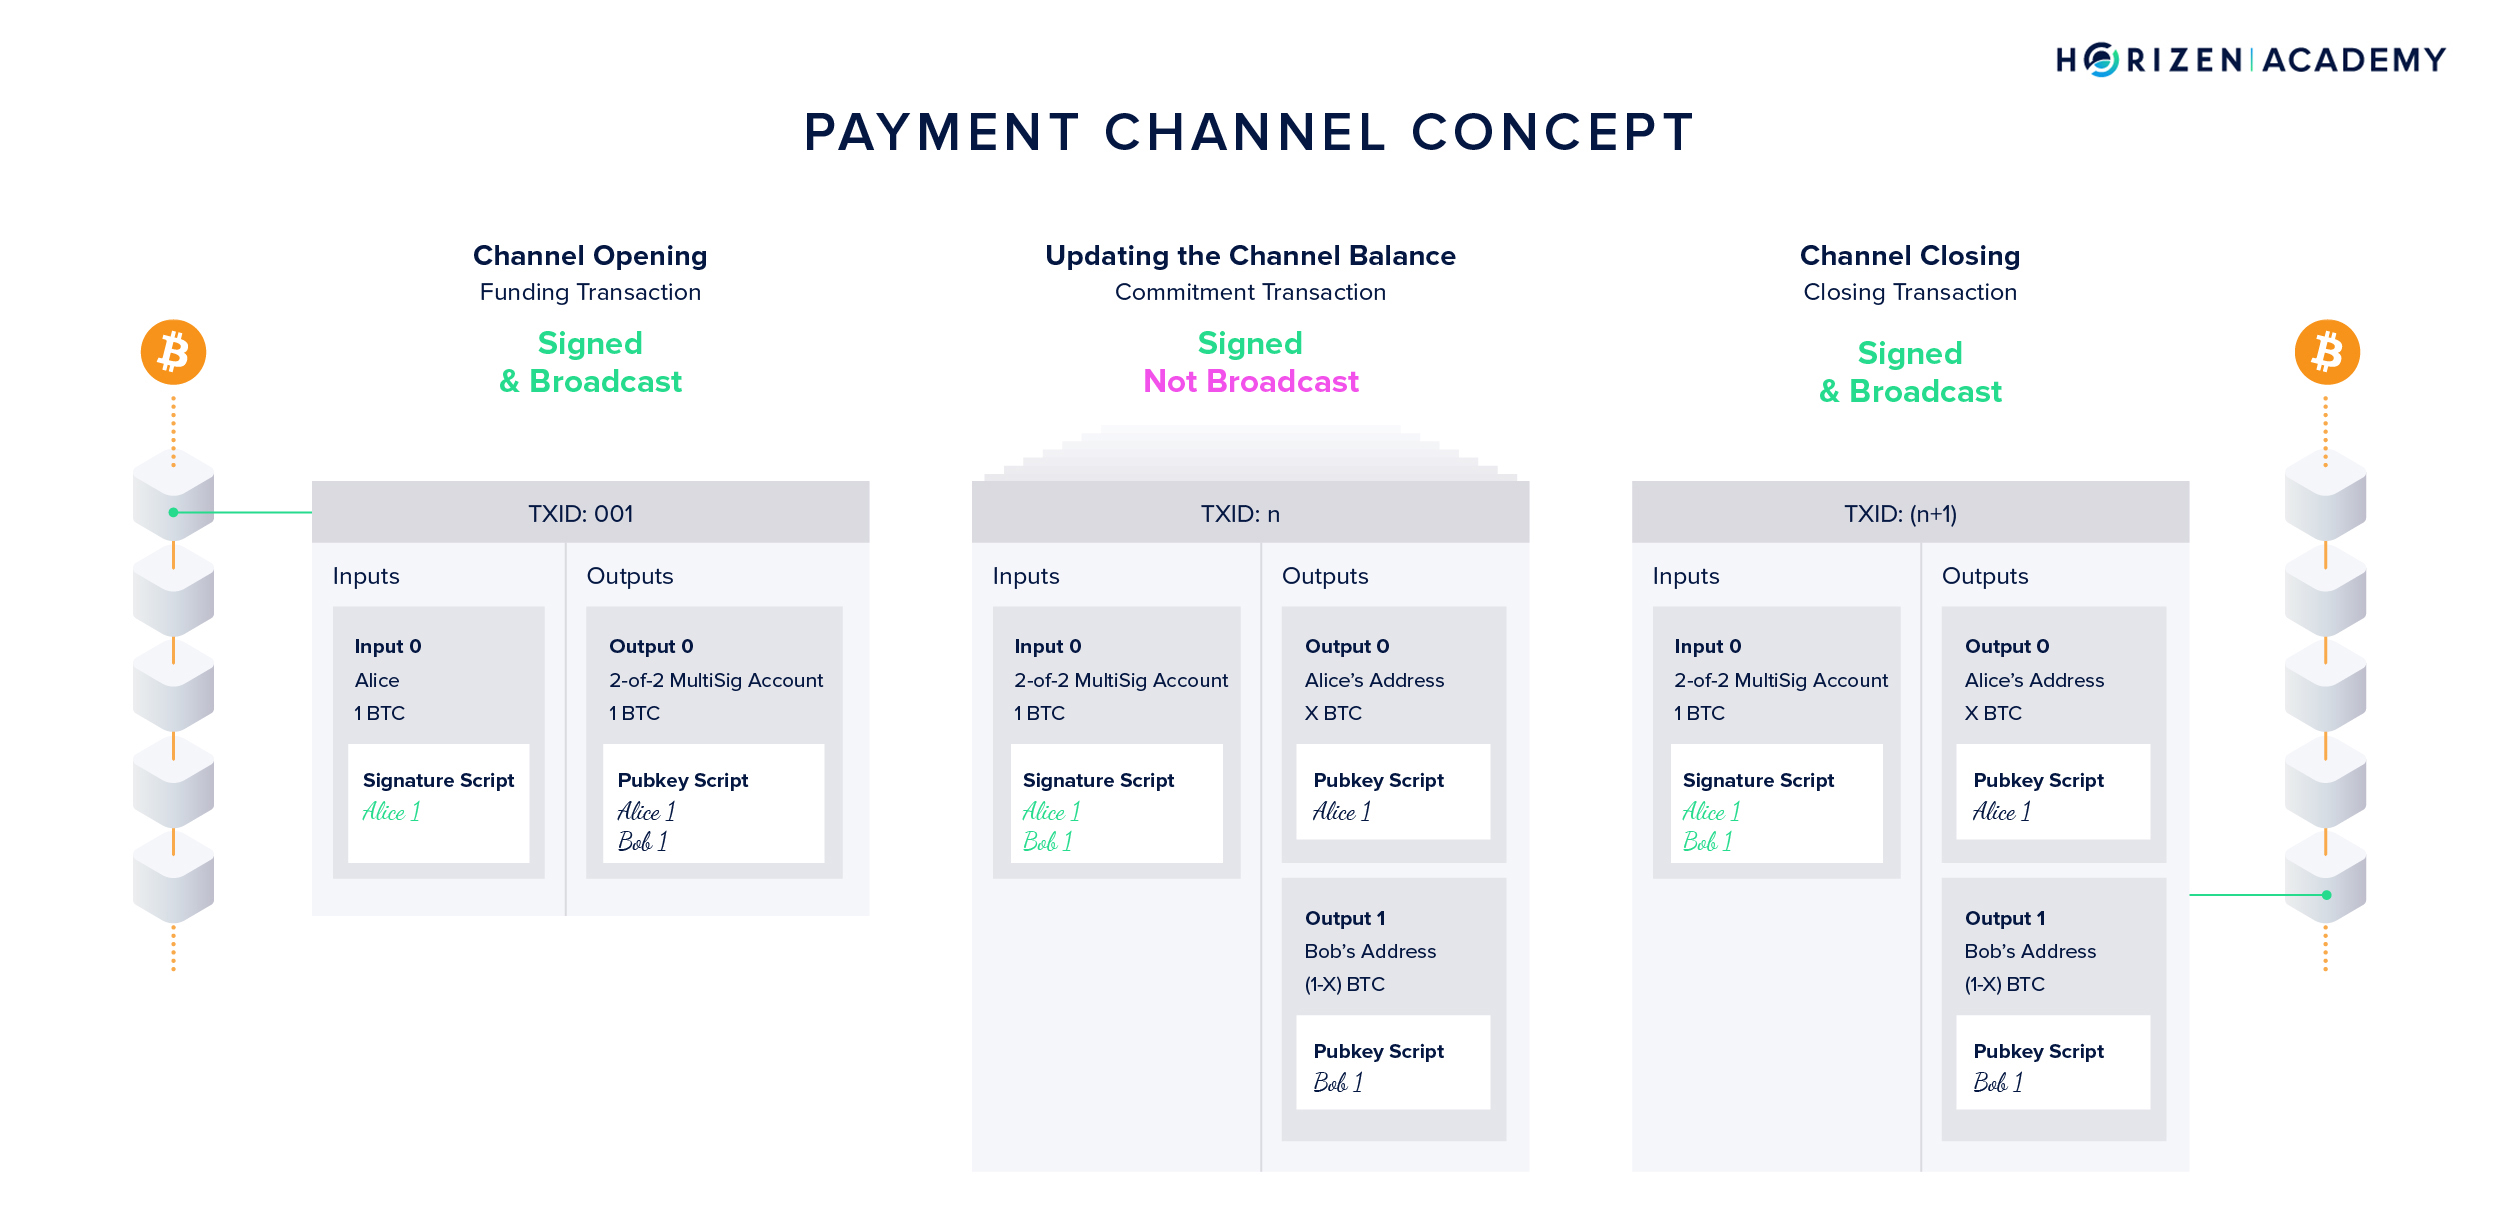 The Concept of Payment Channels